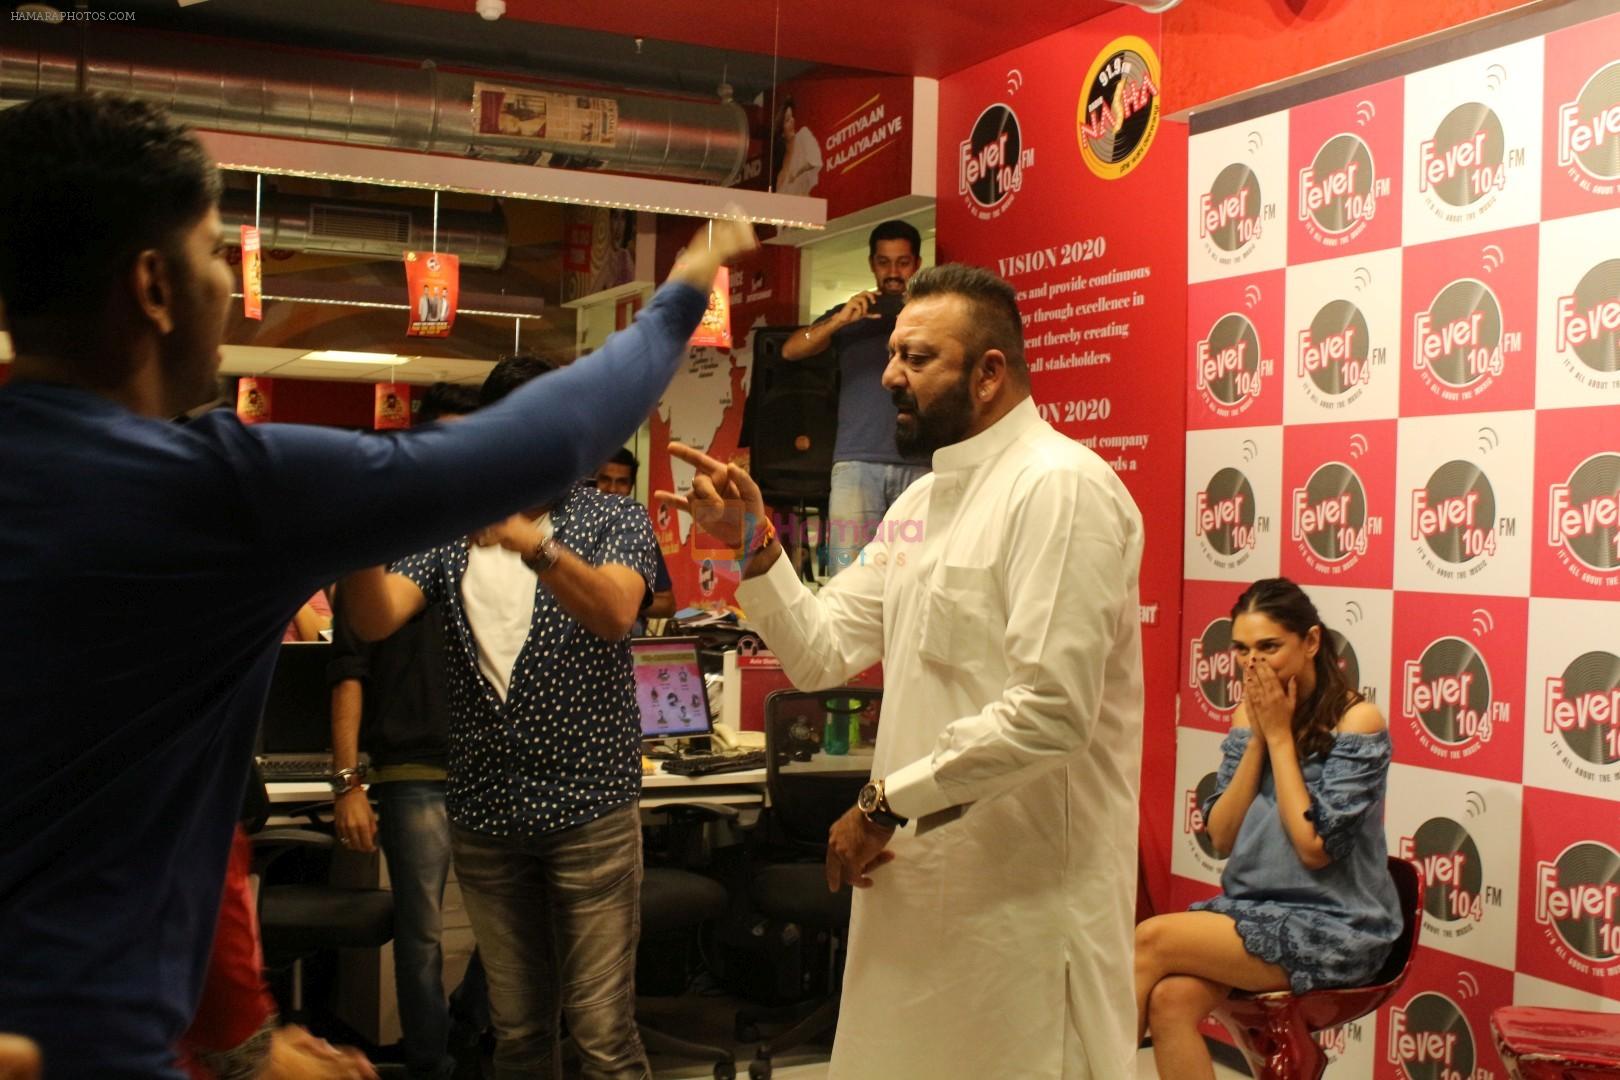 Sanjay Dutt, Aditi Rao Hydari Spotted At FEVER 104 FM For Promoting Film Bhoomi on 28th Aug 2017